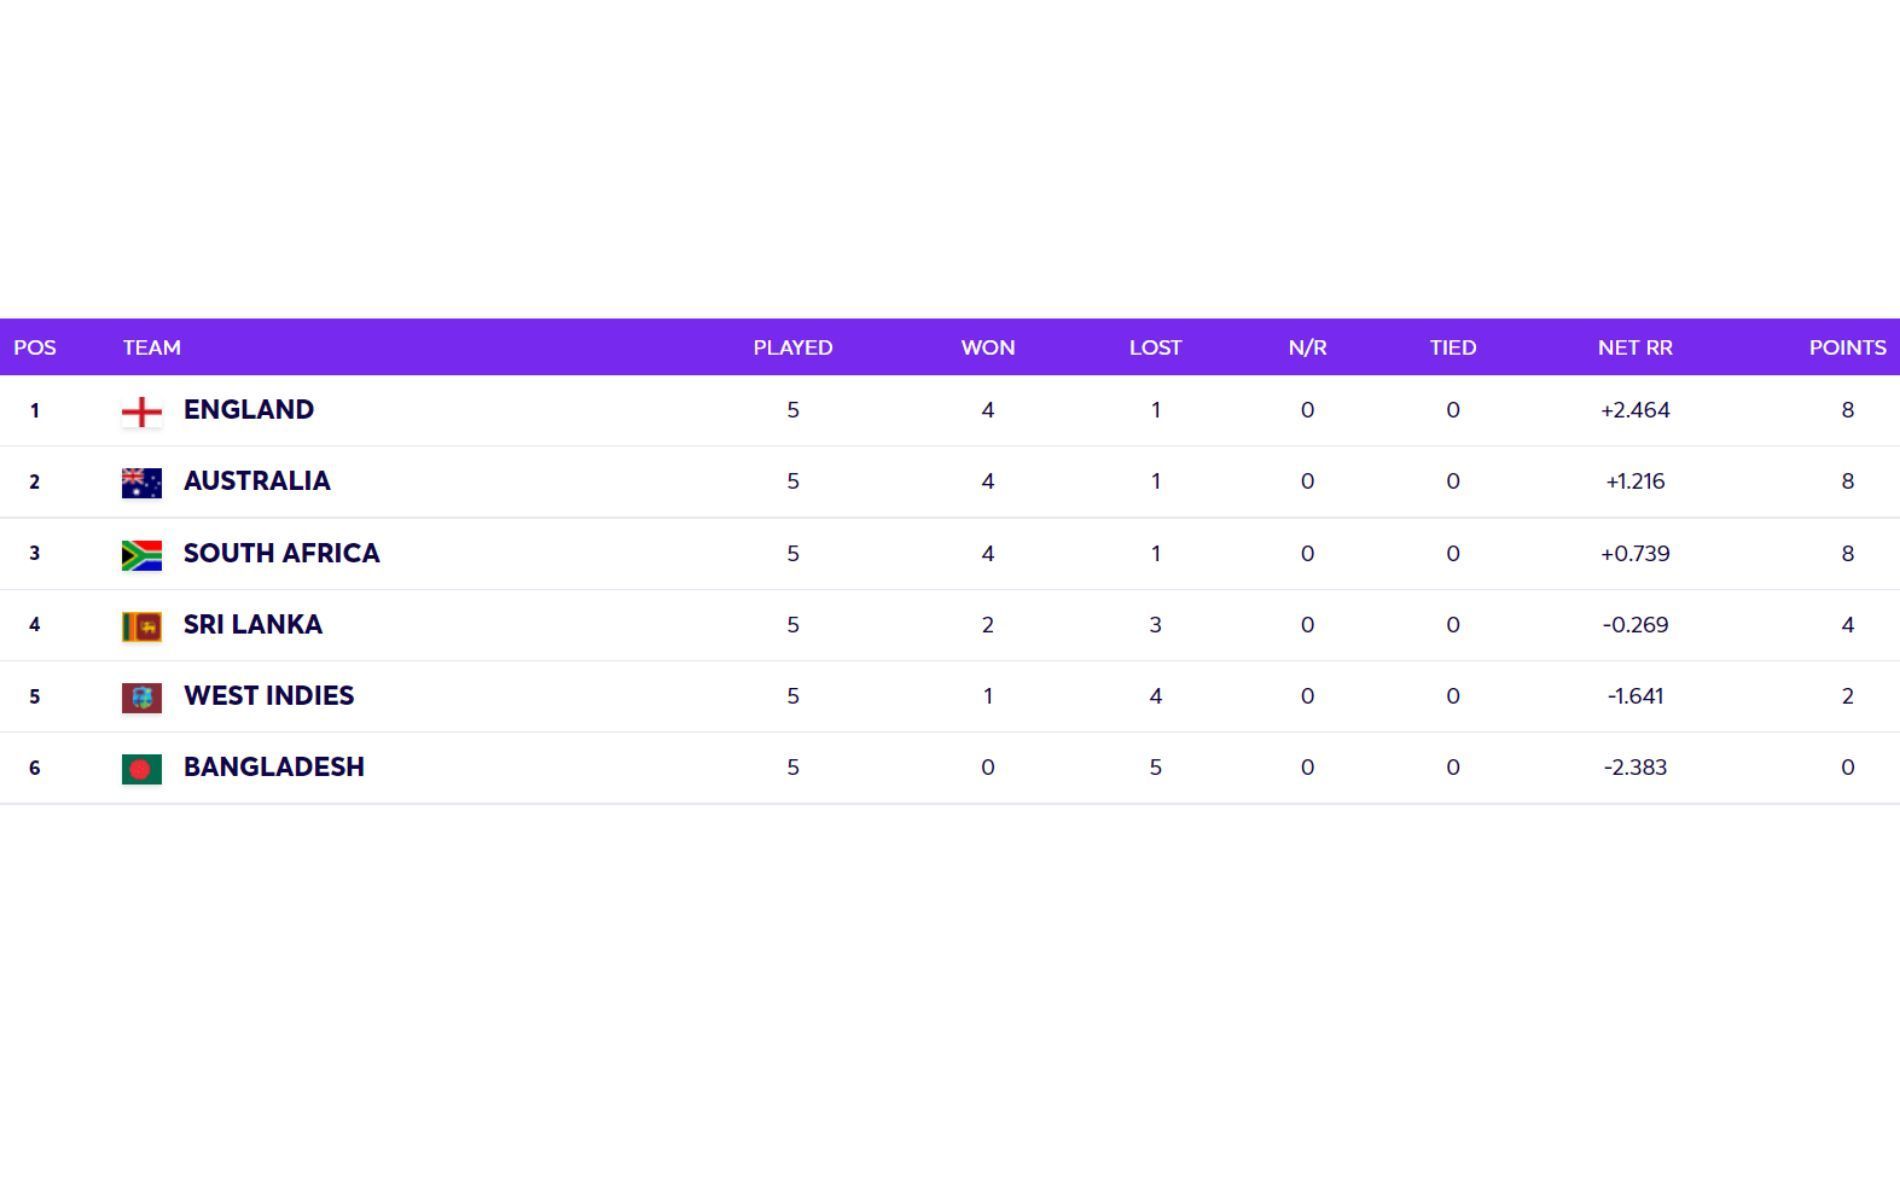 T20 World Cup 2021 Super 12 Group 1 points table updated after Saturday.